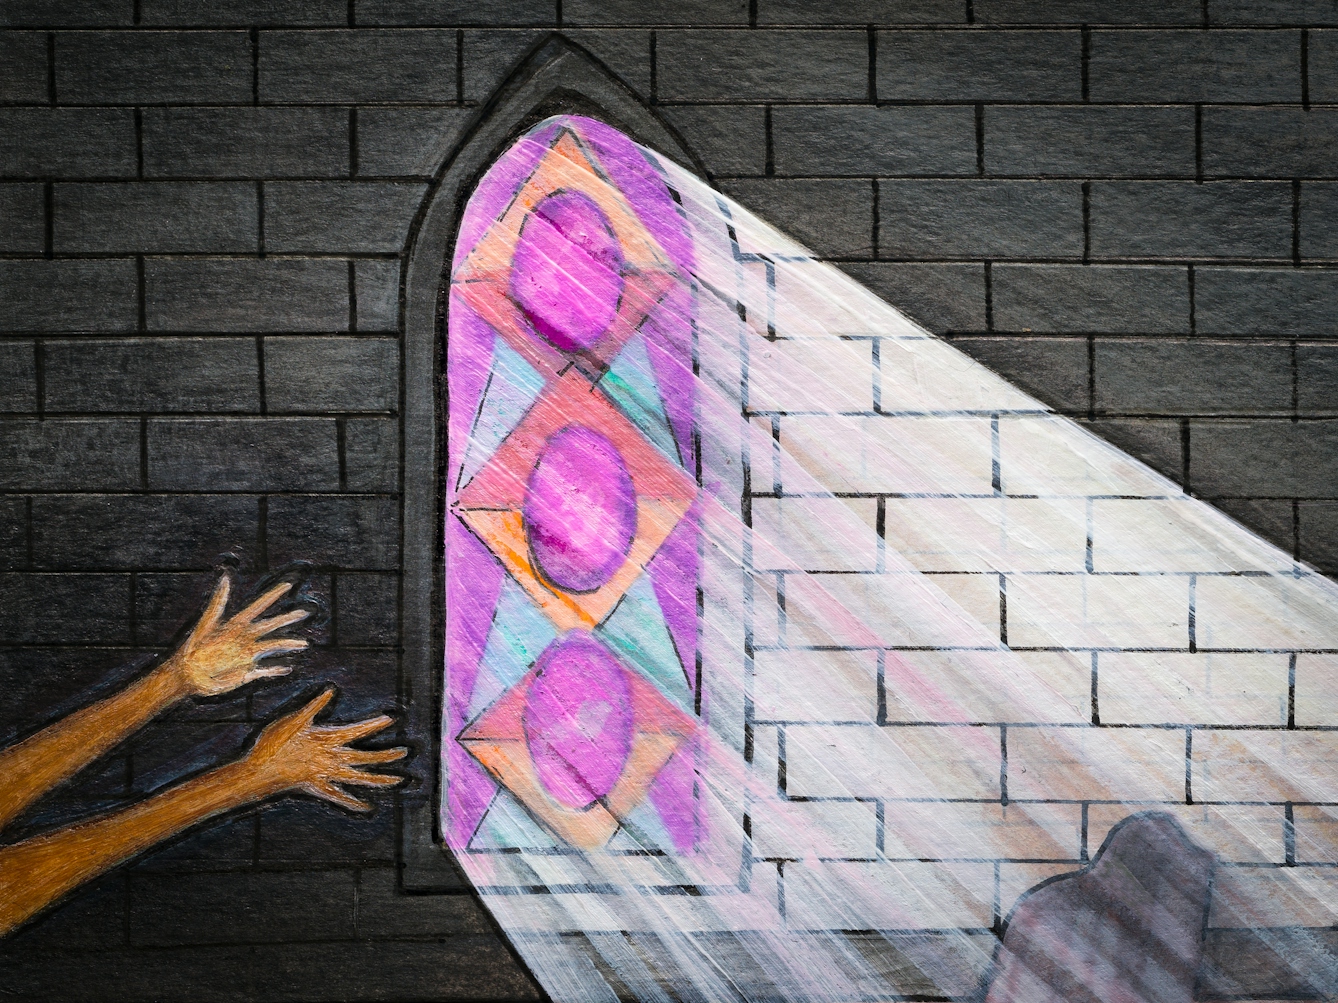 Detail from larger colourful artwork made with paint and ink on textured watercolour paper. The artwork shows a scene in a church with a shaft of light streaming in through an arch shaped purple patterned stained glass window in the grey brick wall behind. On the left side a pair of arms reach into the scene, hands and fingers outstretched. 